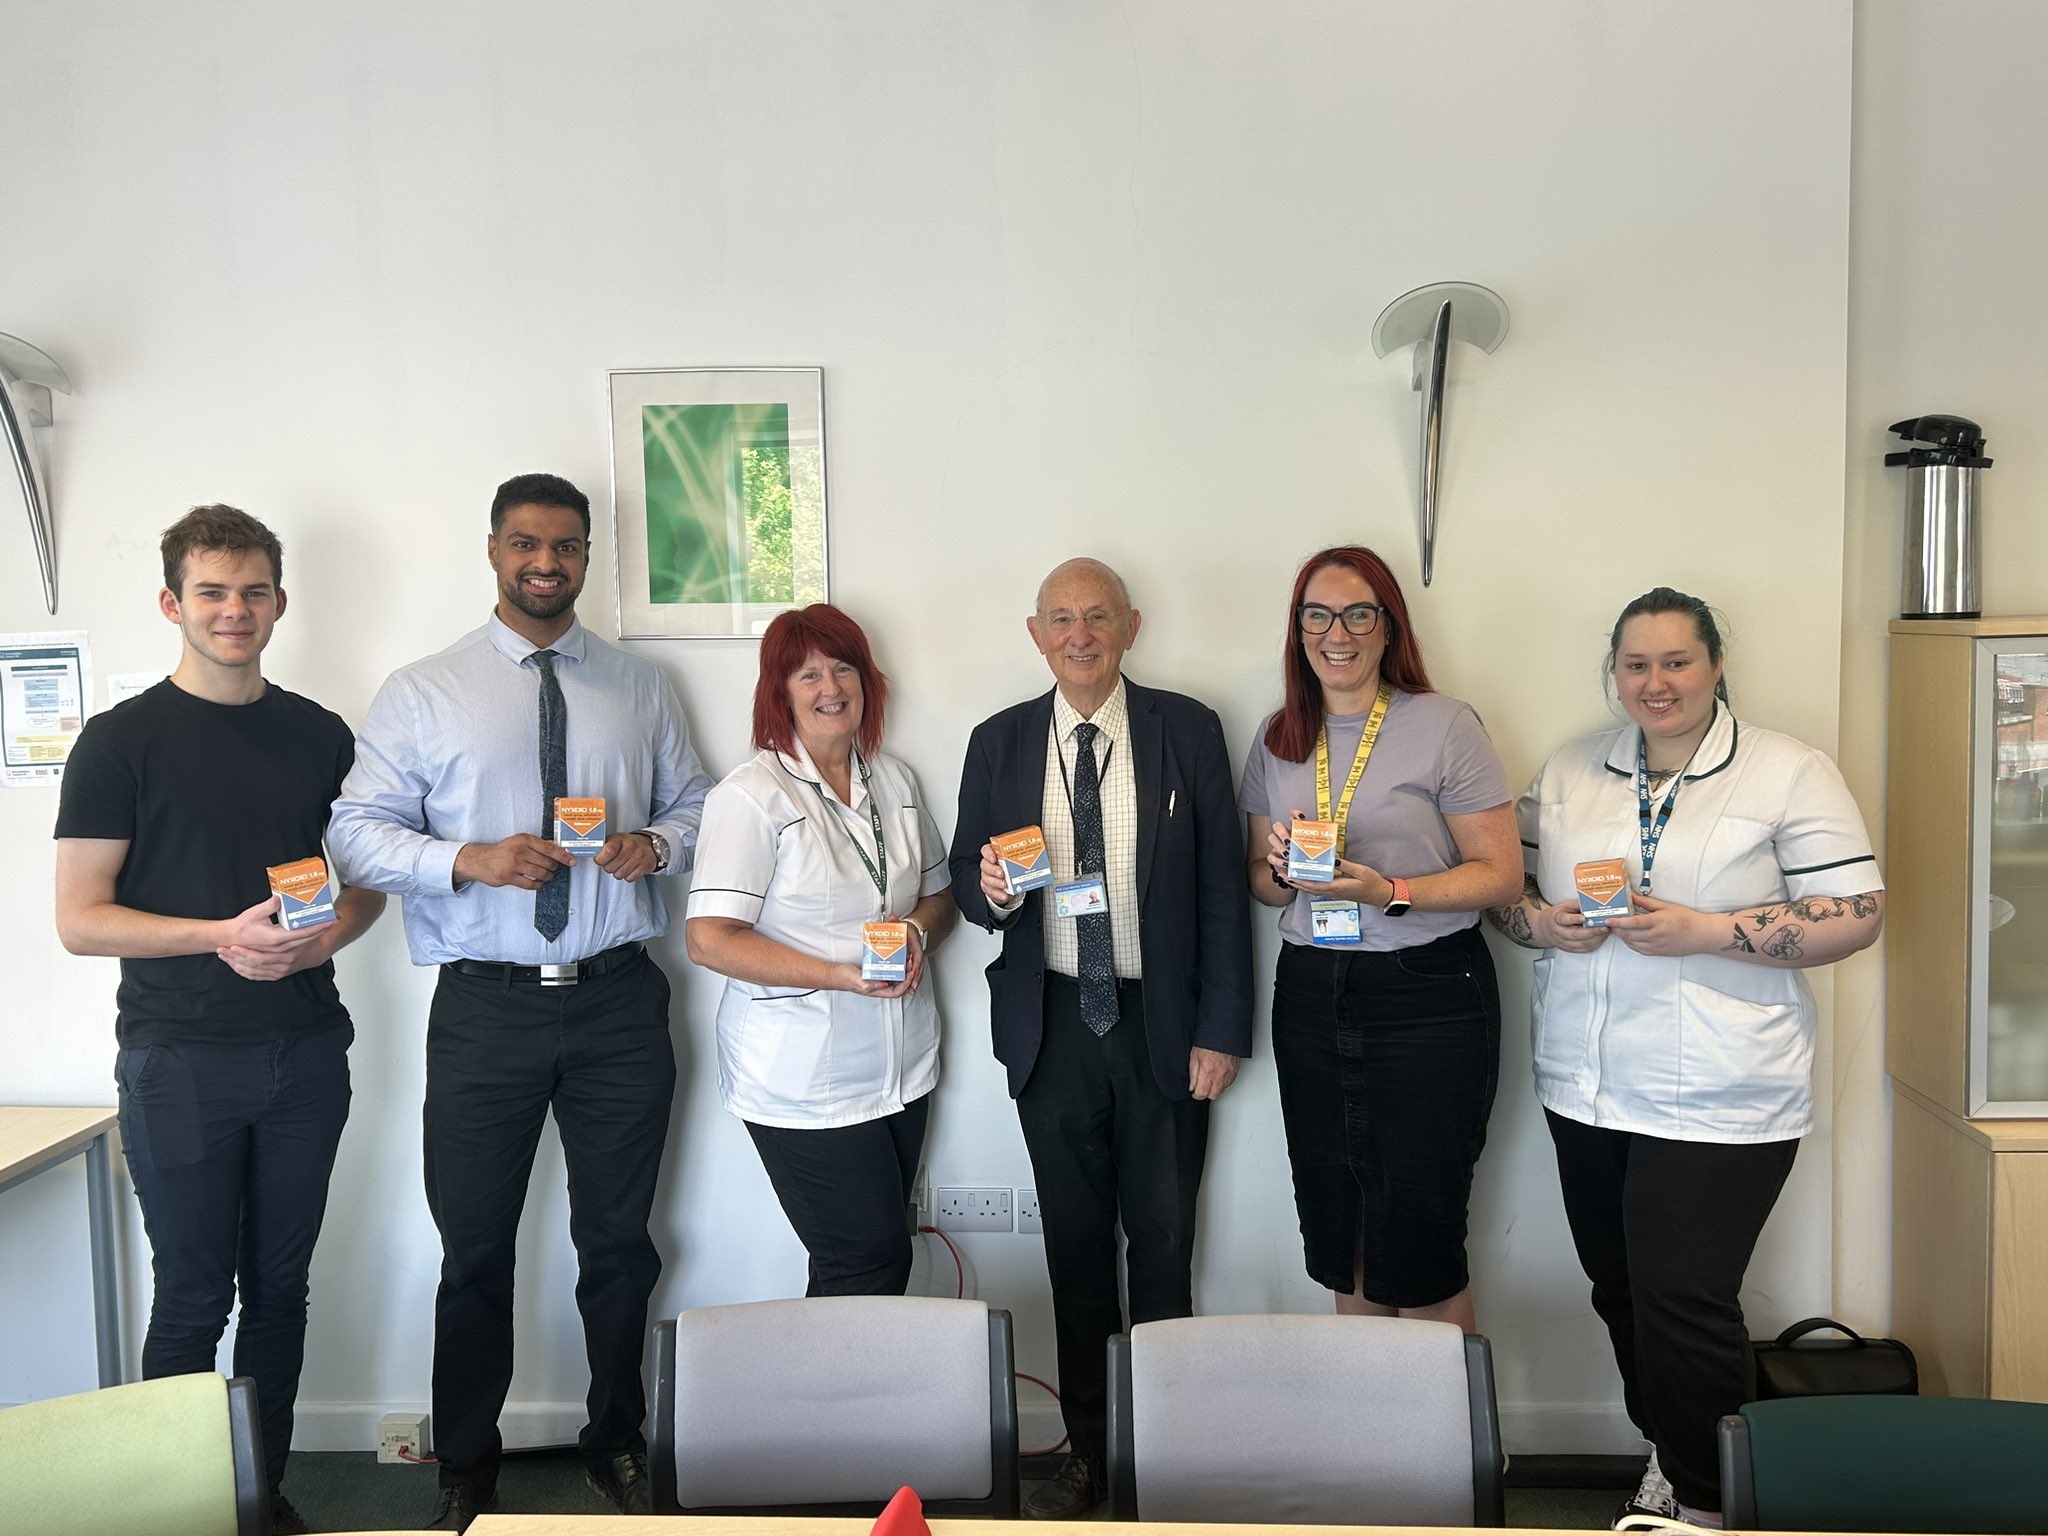 Wicker pharmacy staff holding naloxone kits after being trained to use them